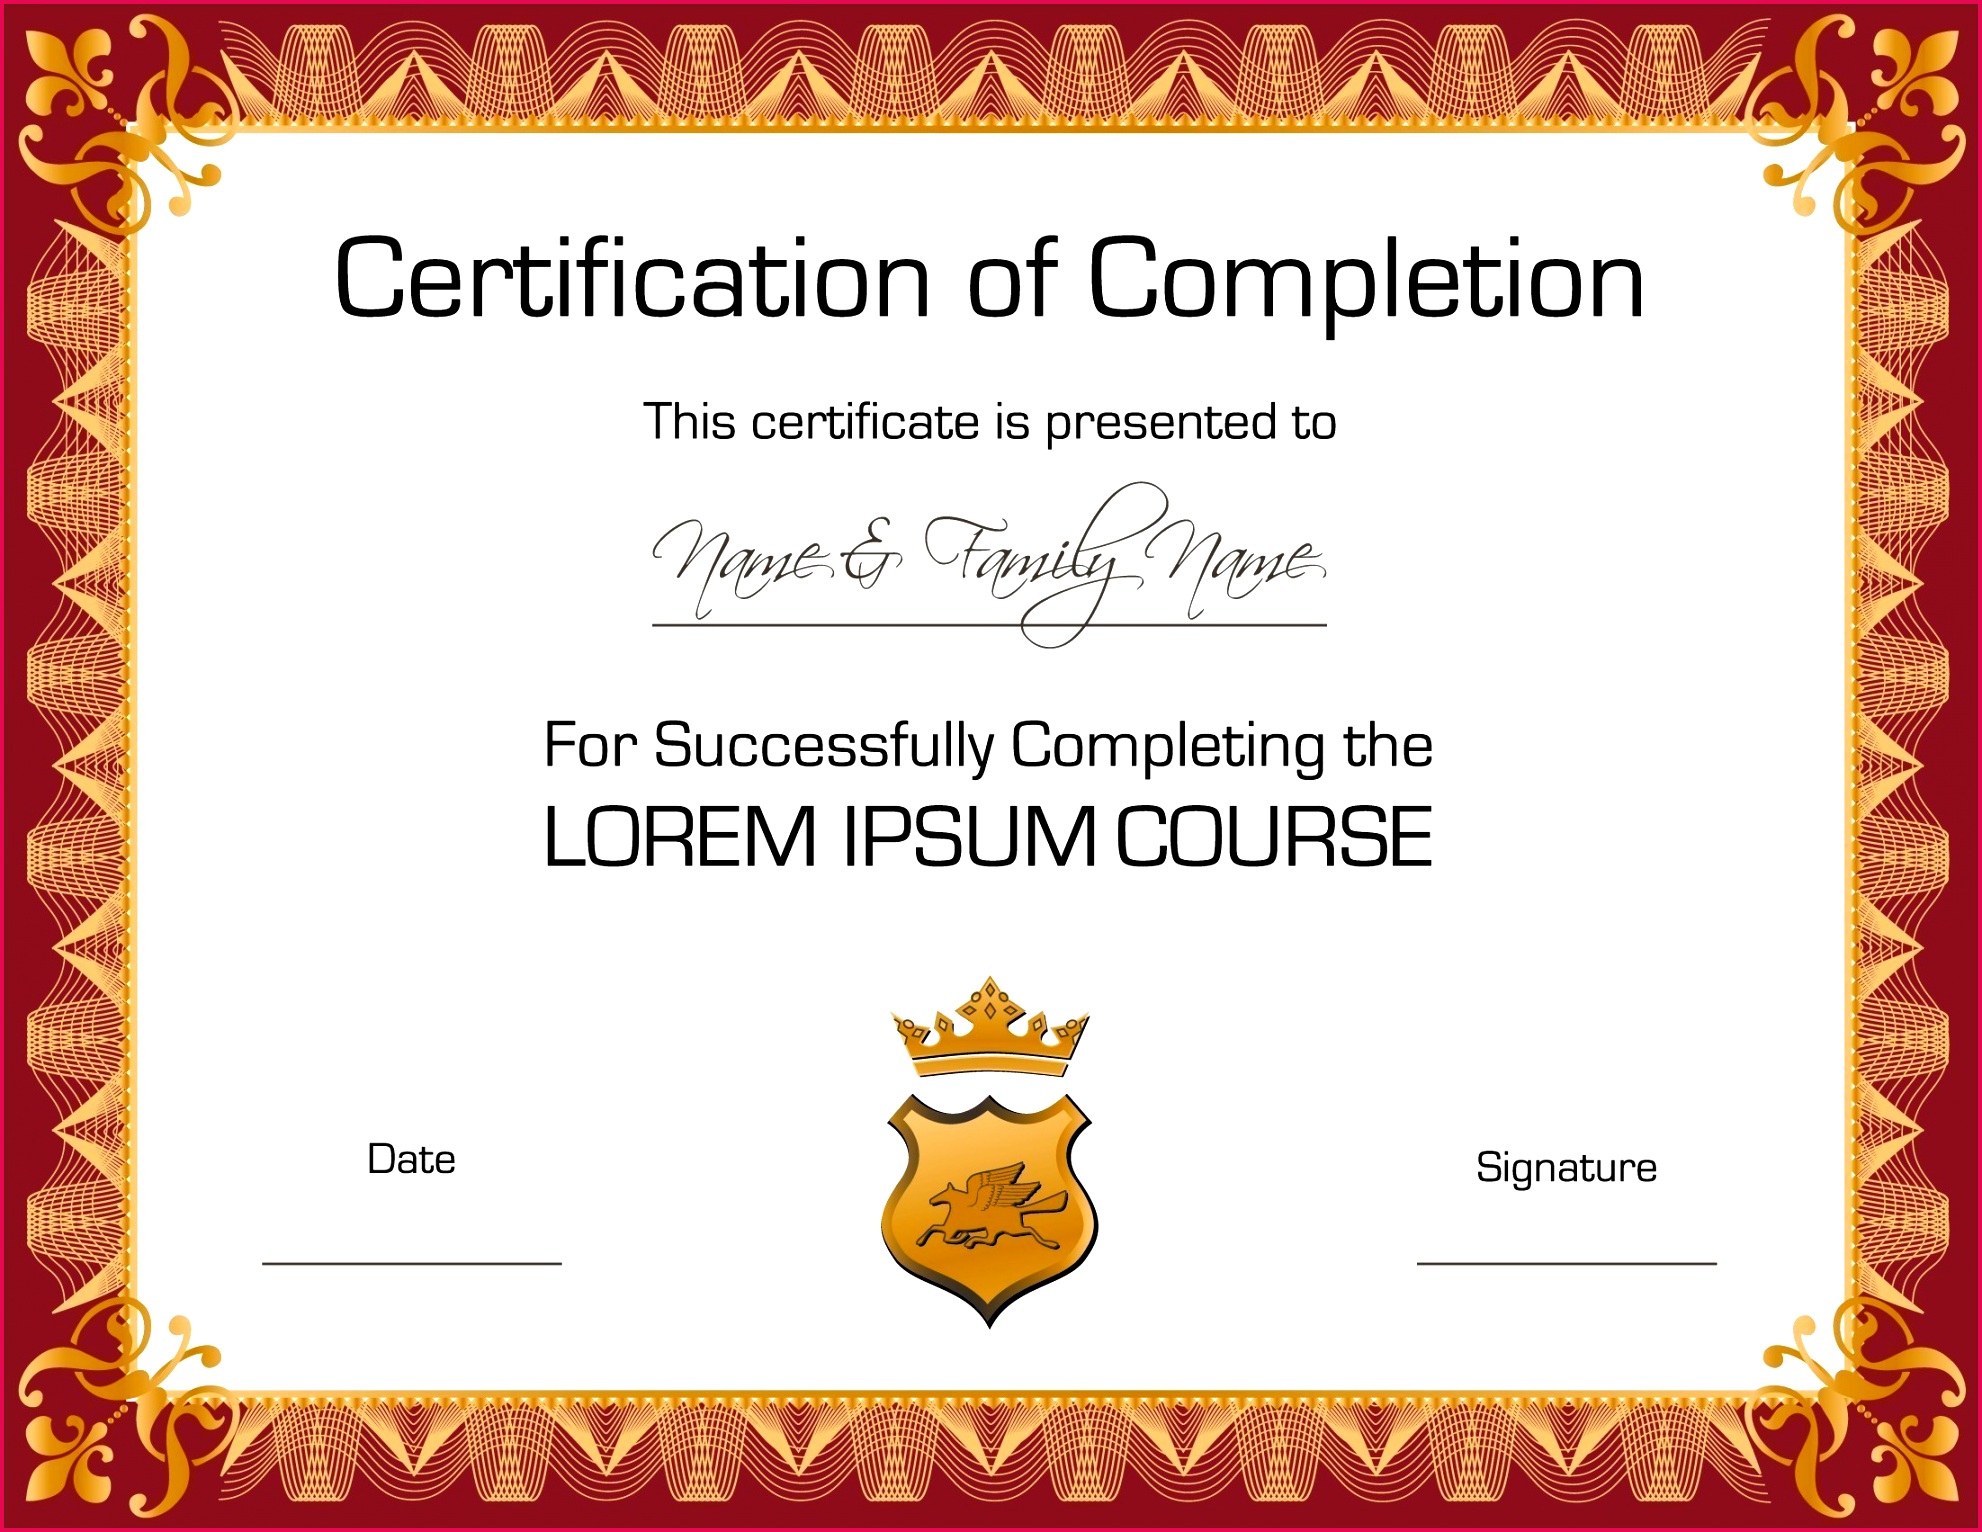 022 Template Ideas Free Printable Certificates And Awards Luxury Certificate Vector Copy Award